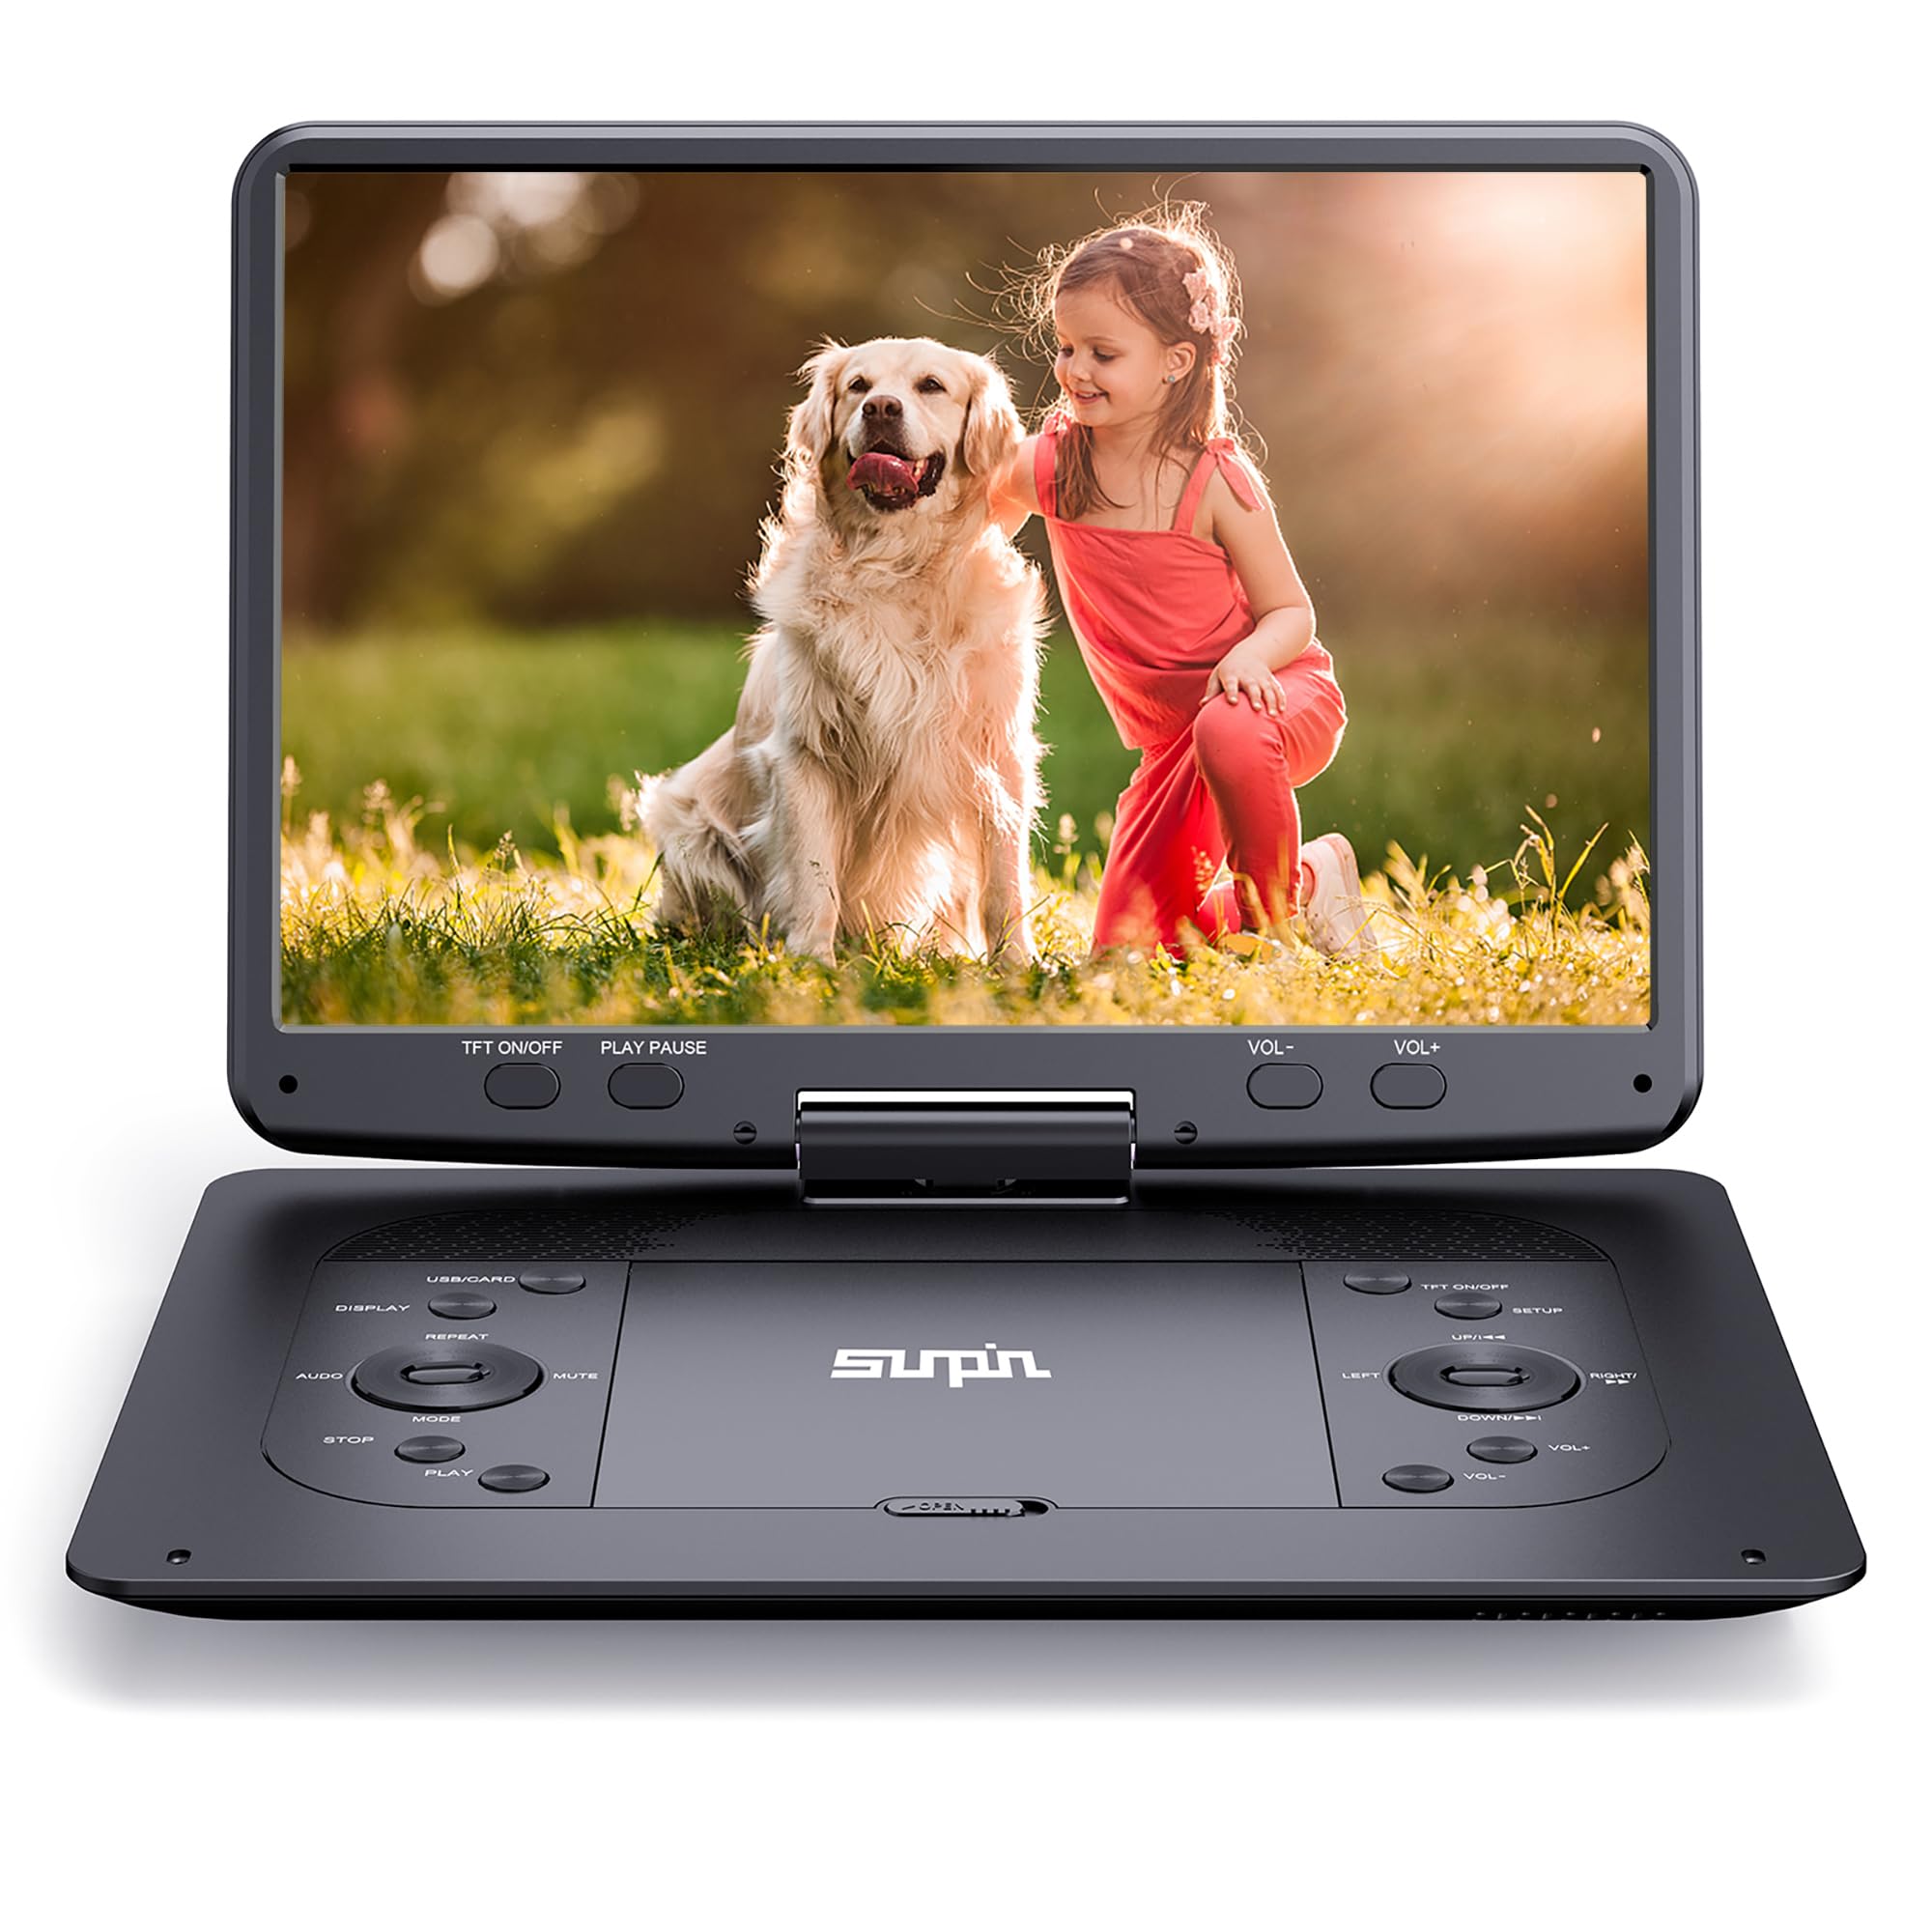 SUNPIN 16.9''Portable DVD Player with 14.1''HD Large Screen,Kids DVD Players,Unique Extra Button Design,Portable with 5 Hrs Rechargeabl